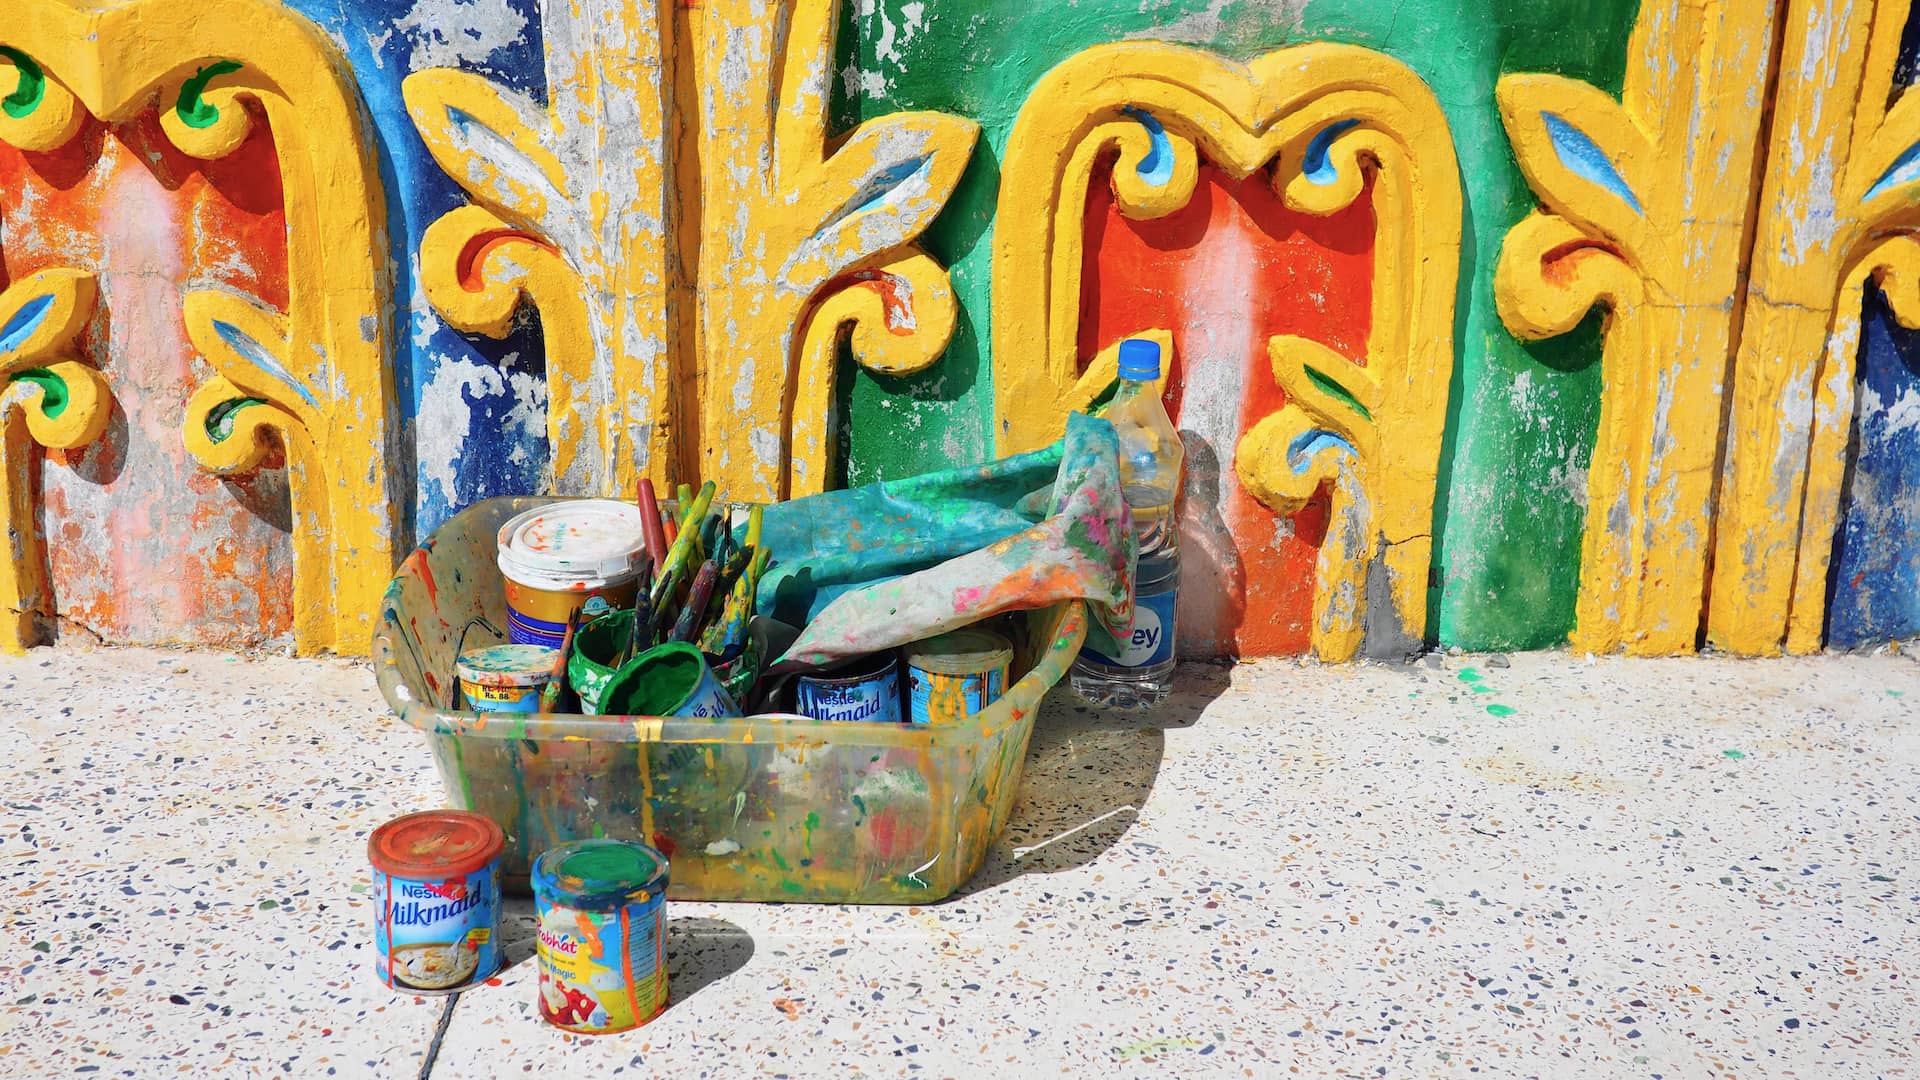 Pots of paint in front of a building wall coloured red, blue, green and yellow